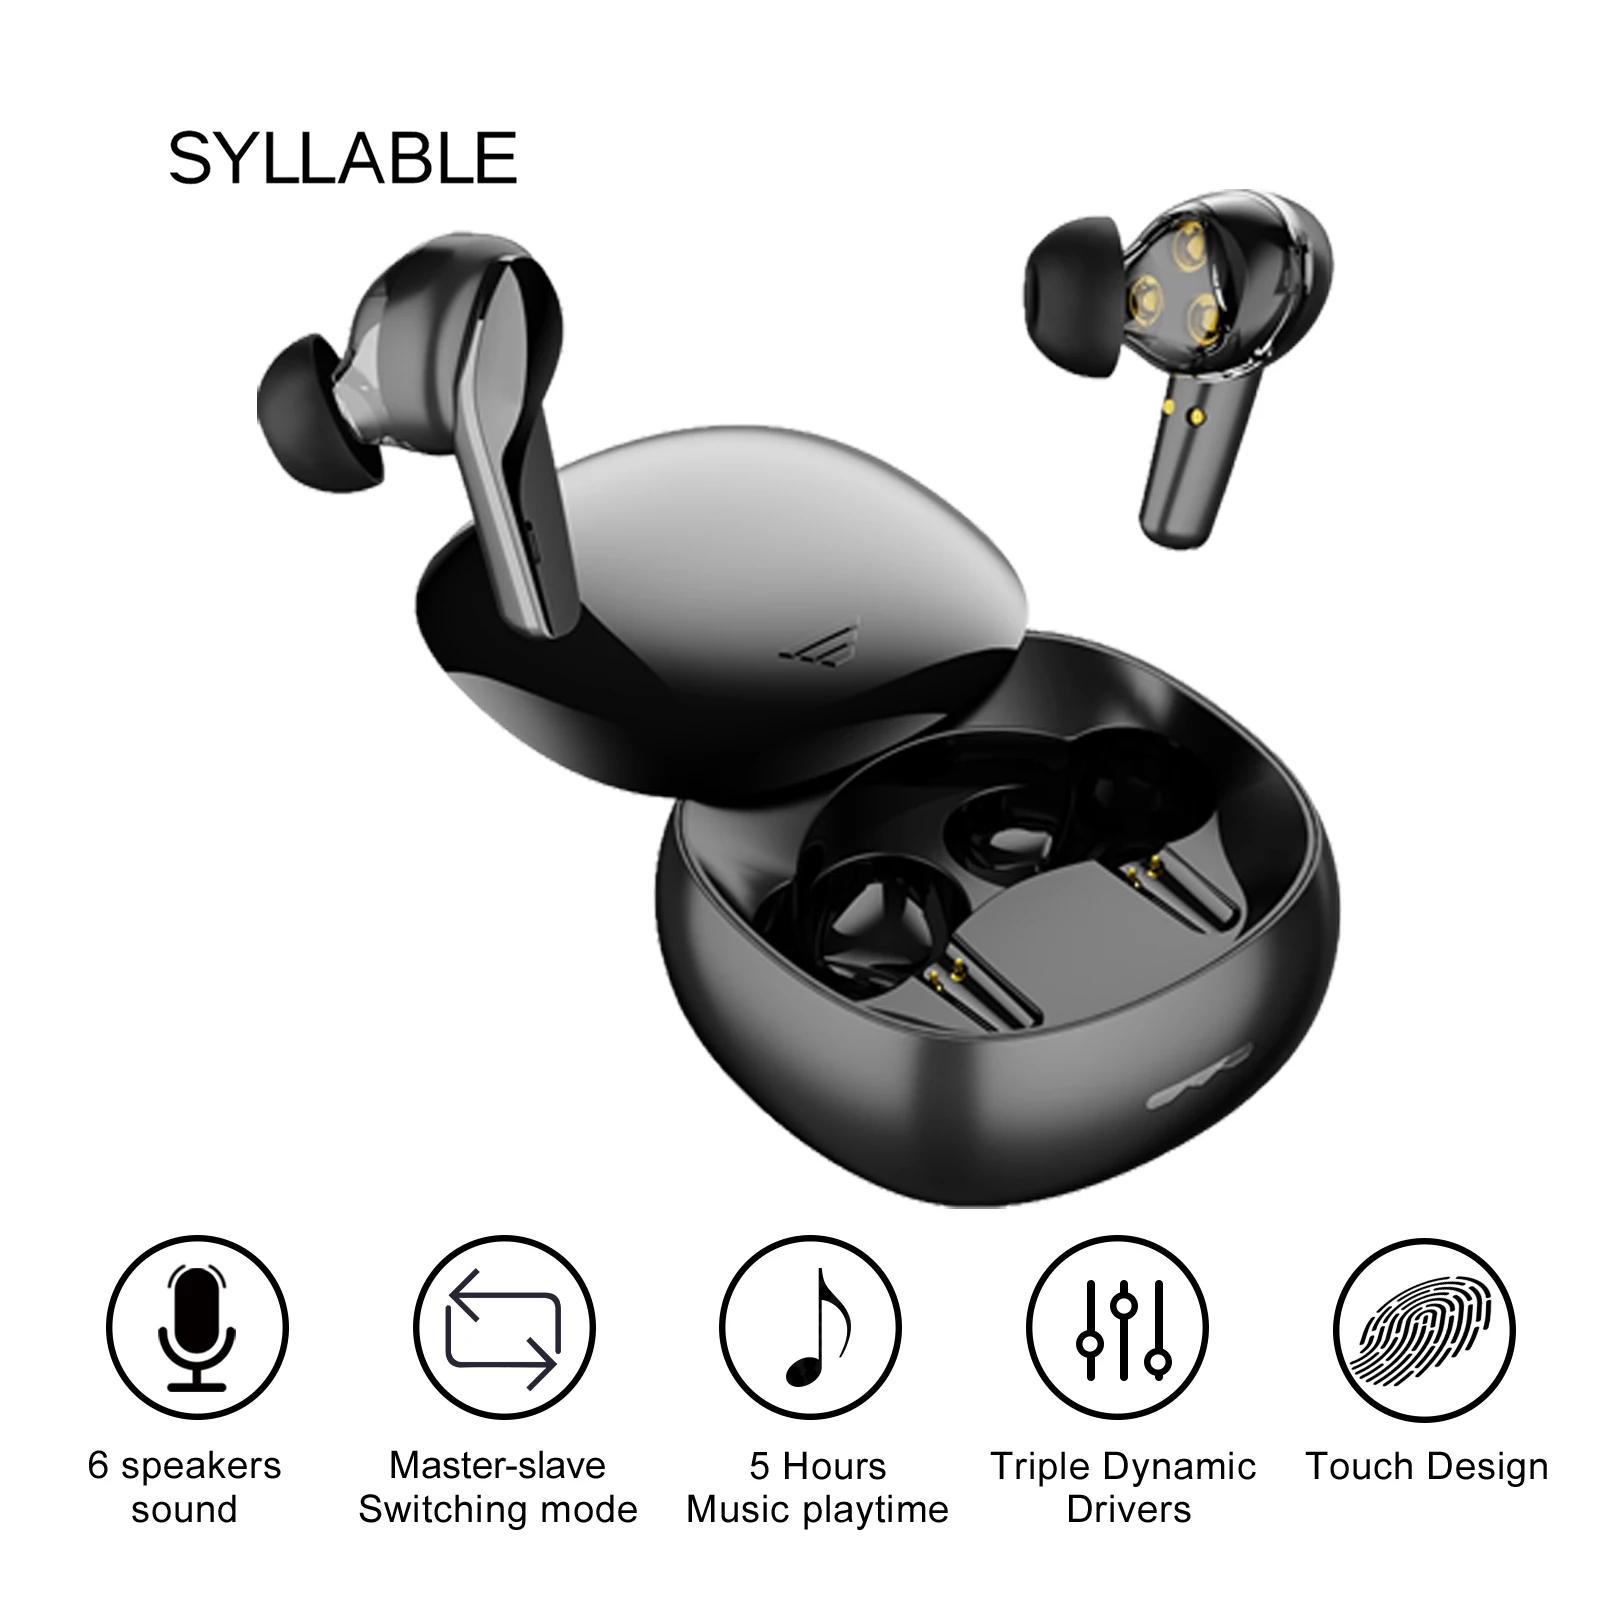 

SYLLABLE WD1100 TWS Earphones 6 Speaker Sound True Wireless Stereo Earbuds Triple Dynamic Drivers Touch SYLLABLE WD1100 Headset